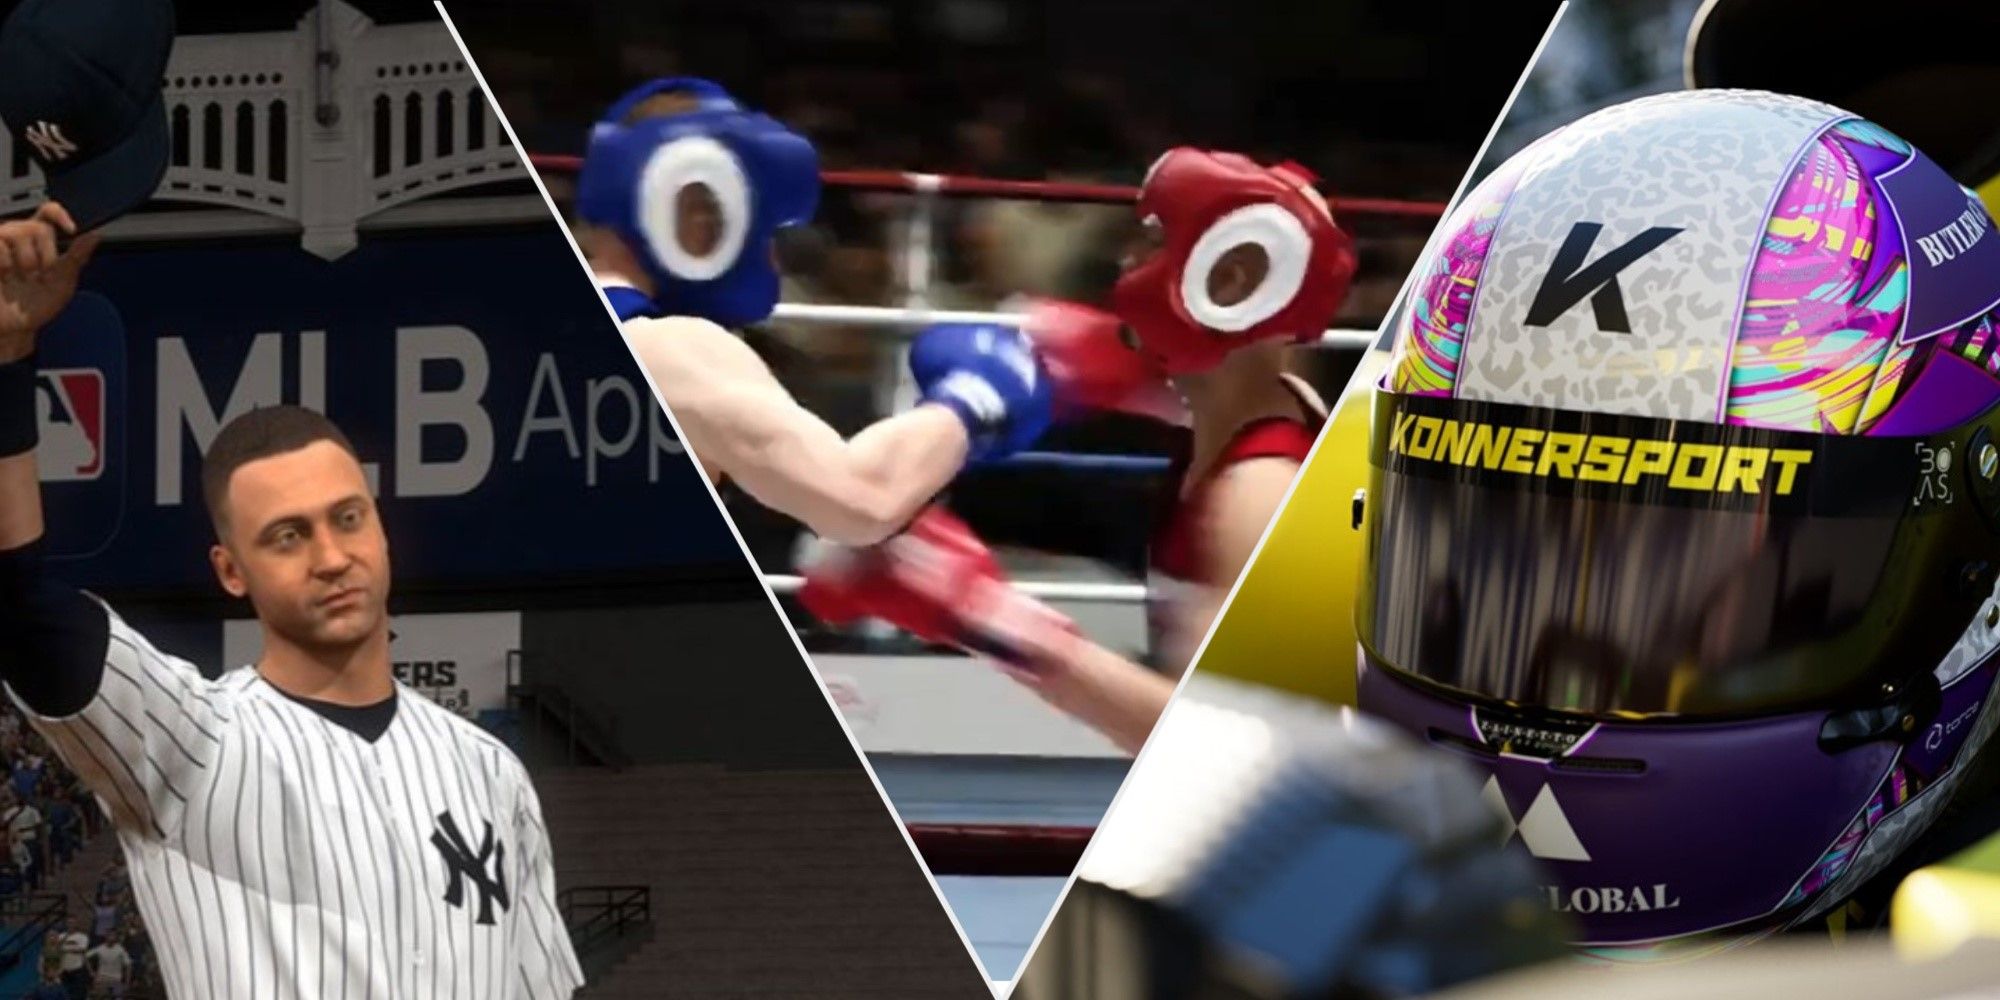 A split image showing career modes from MLB The Show 24, Fight Night Champion and F1 23